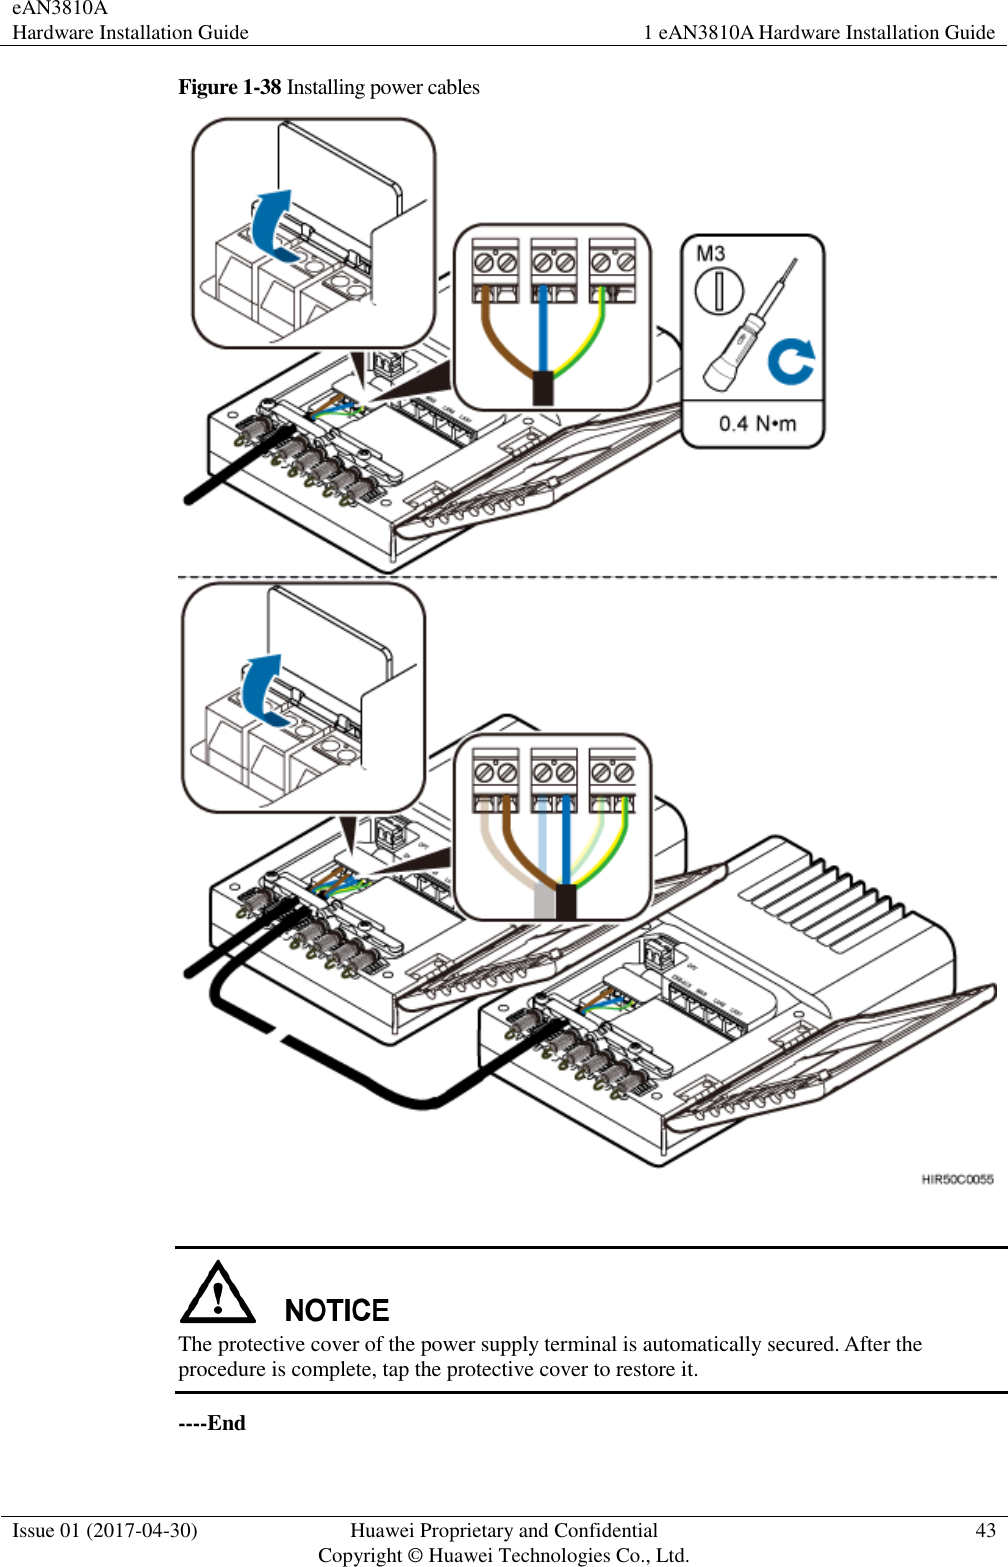 eAN3810A   Hardware Installation Guide 1 eAN3810A Hardware Installation Guide  Issue 01 (2017-04-30) Huawei Proprietary and Confidential                                     Copyright © Huawei Technologies Co., Ltd. 43  Figure 1-38 Installing power cables    The protective cover of the power supply terminal is automatically secured. After the procedure is complete, tap the protective cover to restore it. ----End 